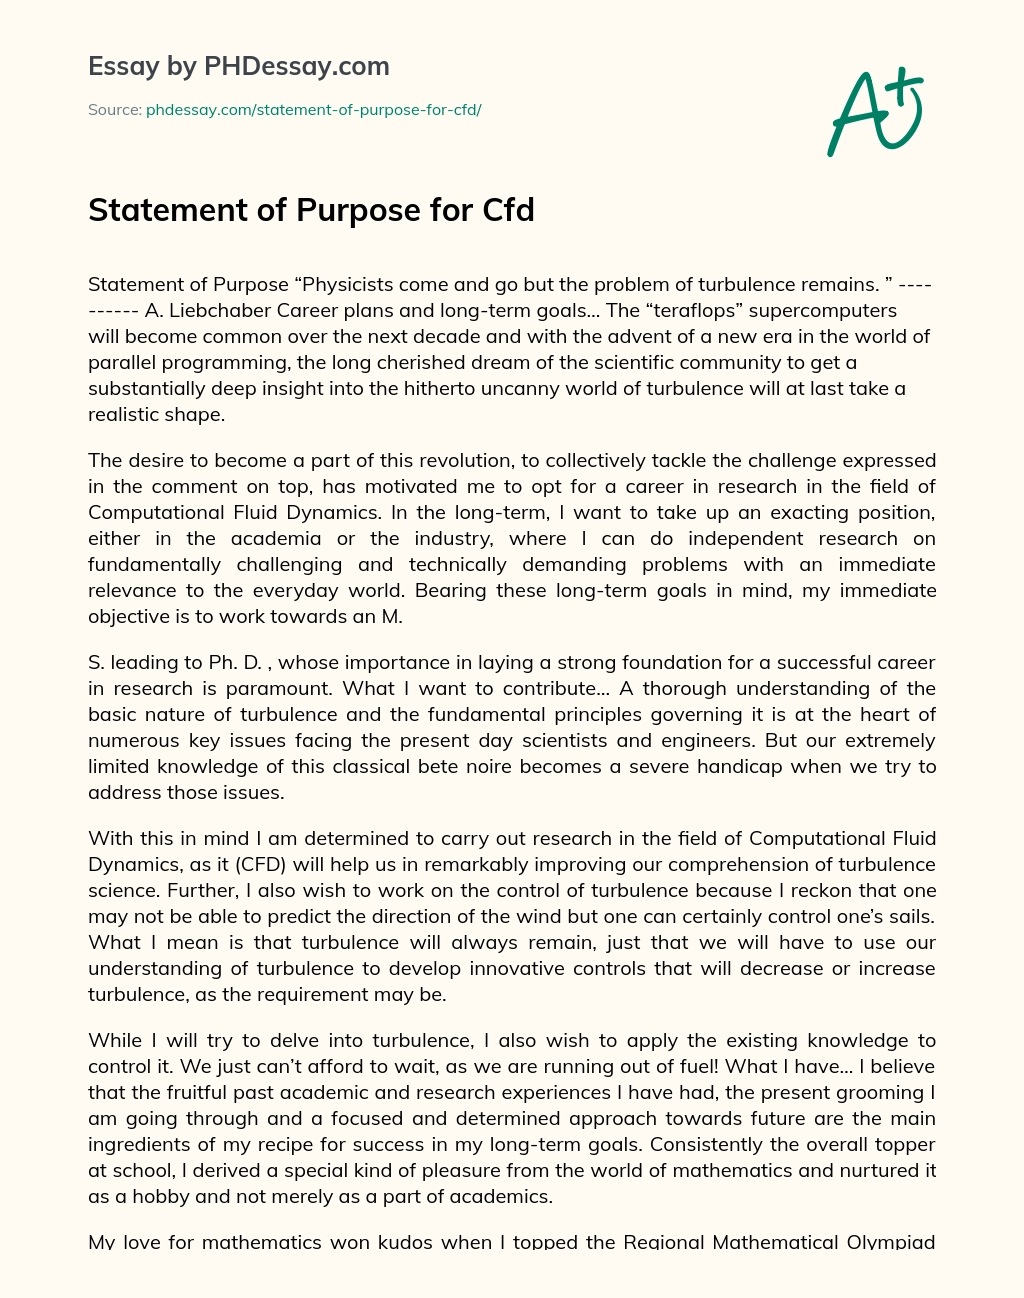 Statement of Purpose for Cfd essay